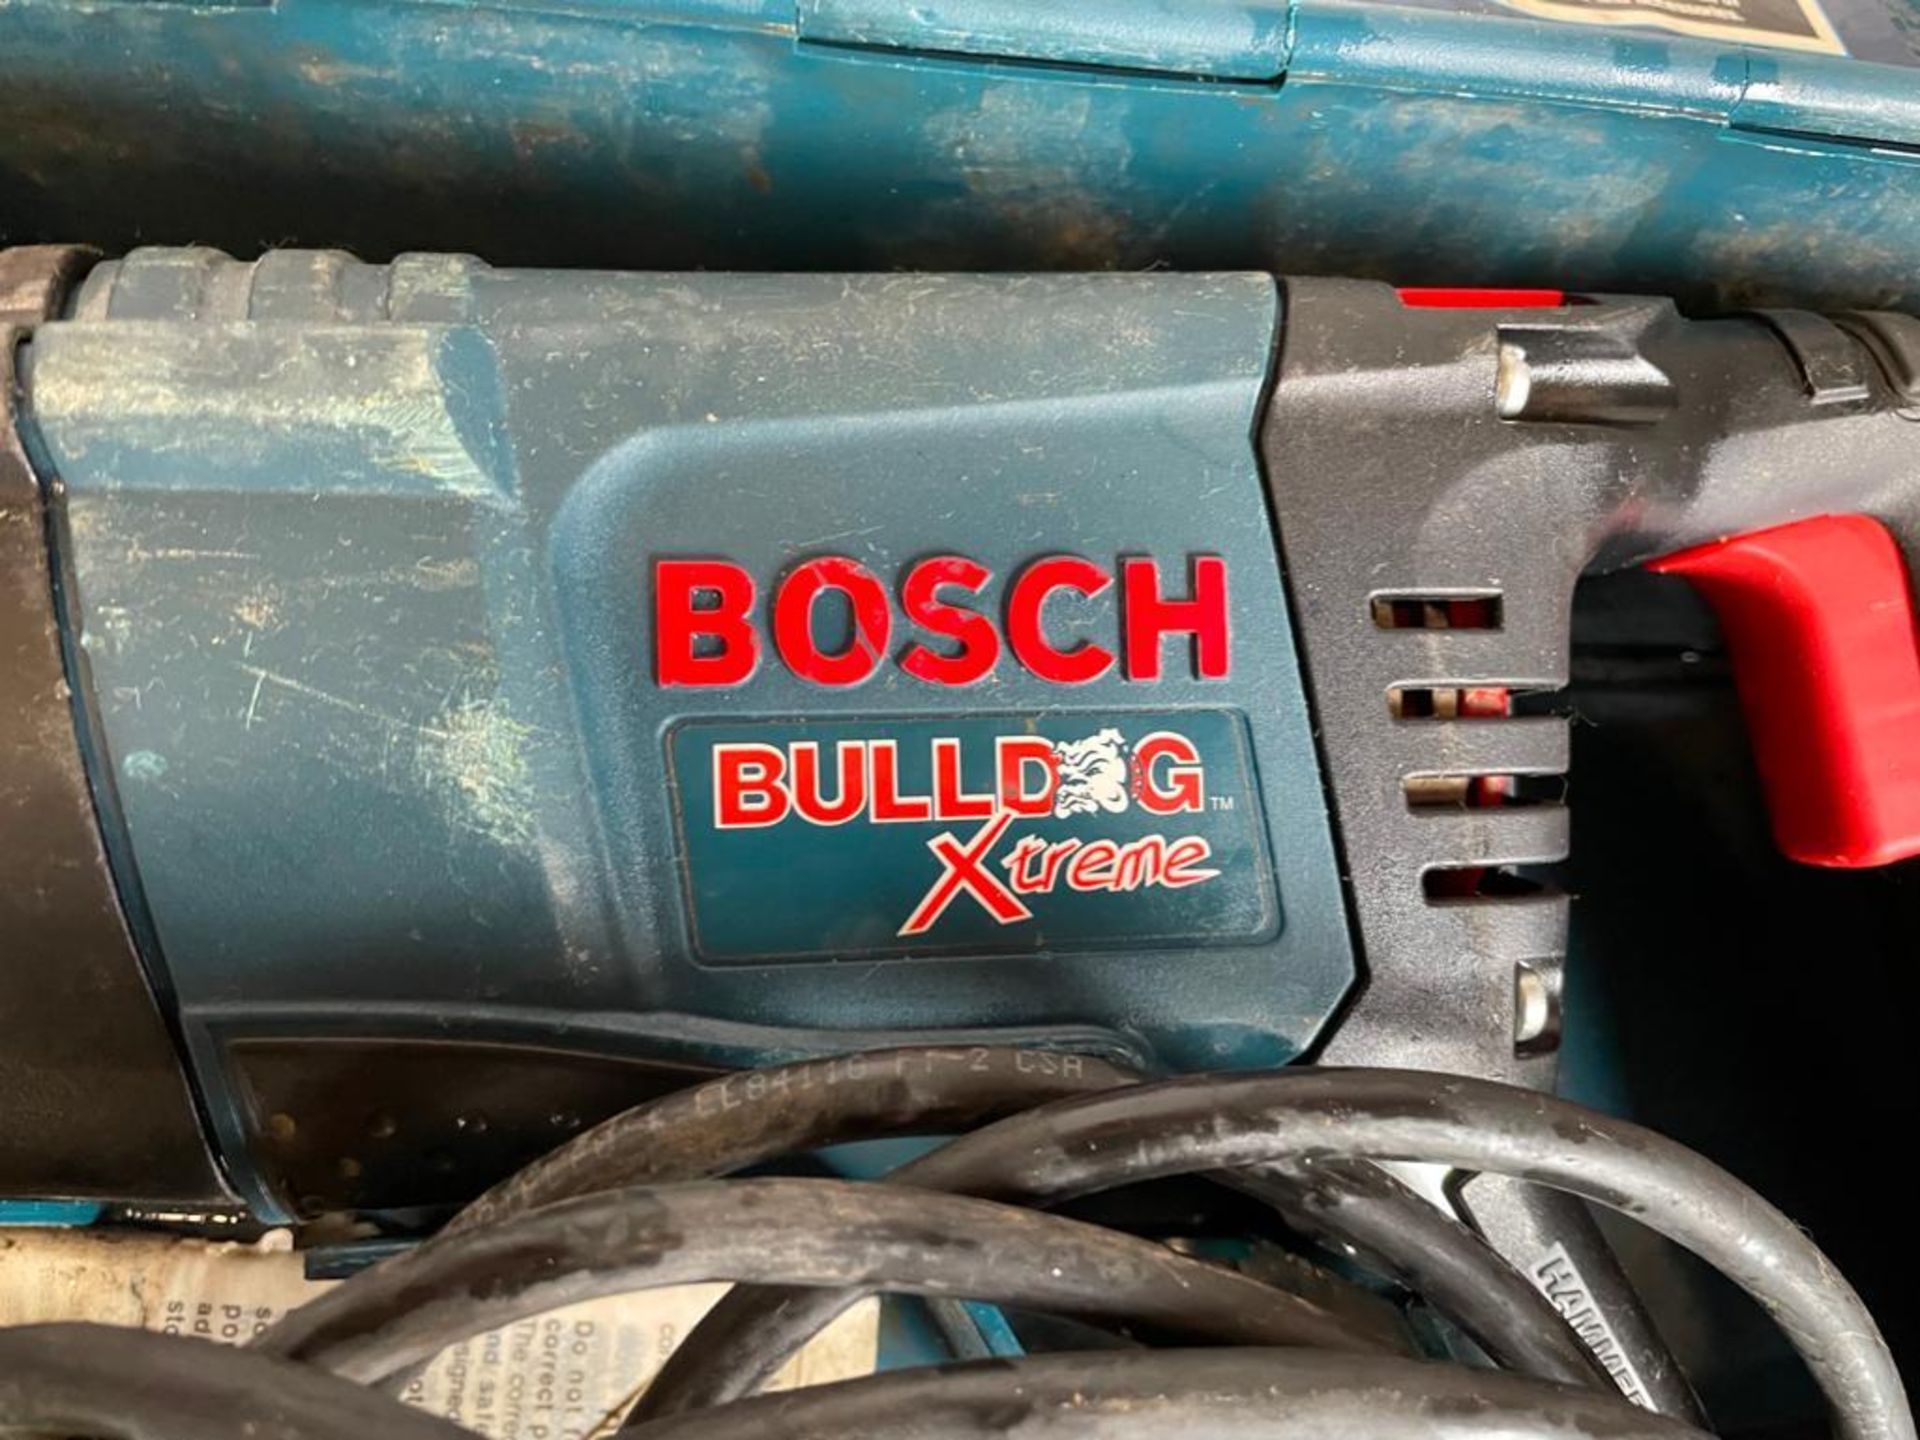 Bosch Bulldog Xtreme Variable Speed Hammer Drill, 120 V. Located in Hazelwood, MO - Image 3 of 6